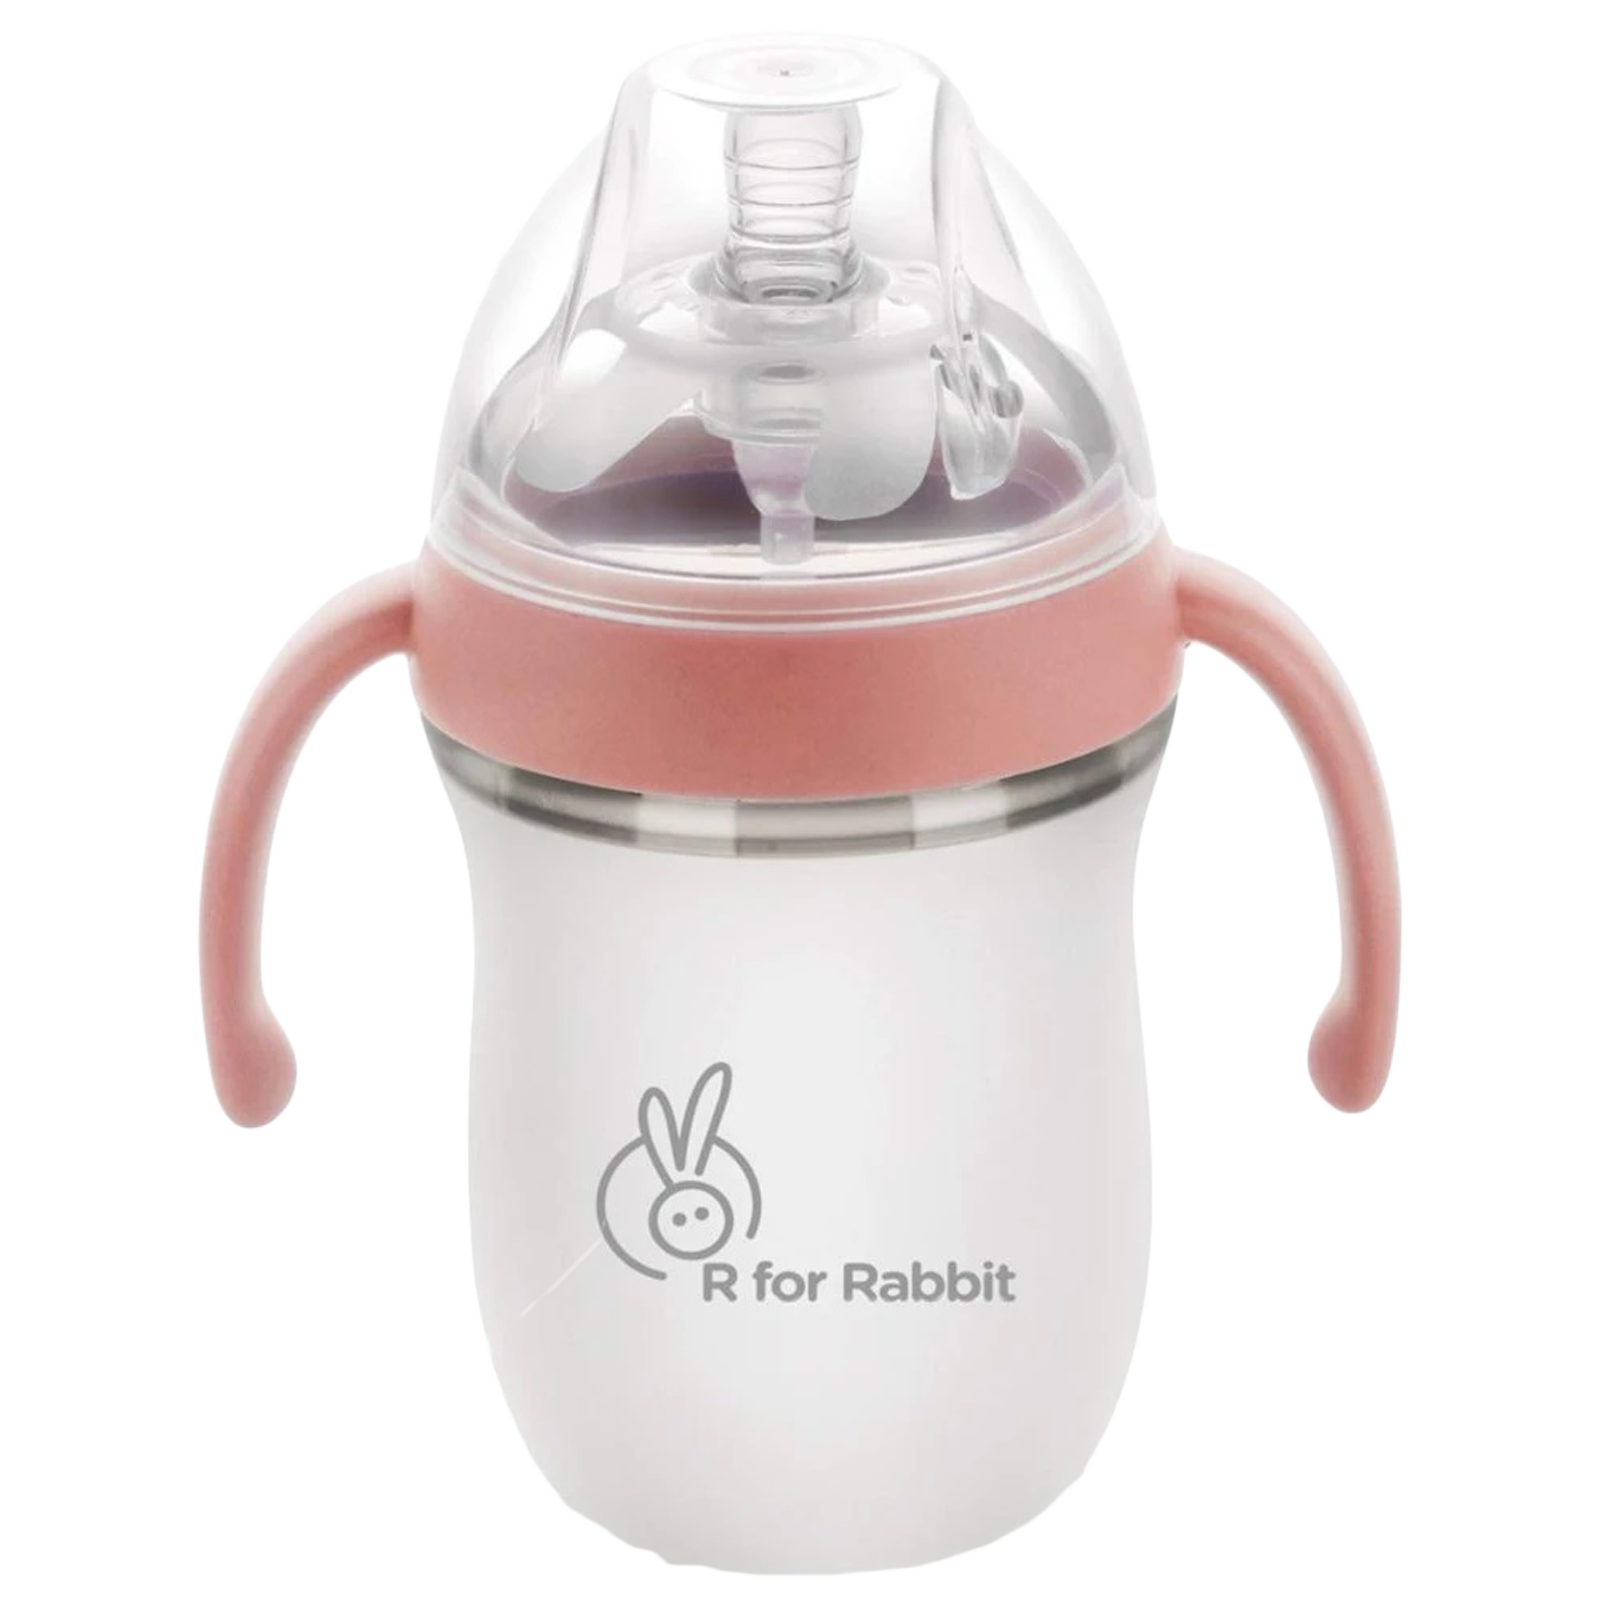 R for Rabbit - R for Rabbit First Feed 160ml Baby Feeding Bottle (Anti-Colic Design, SBFFP160, Pink)